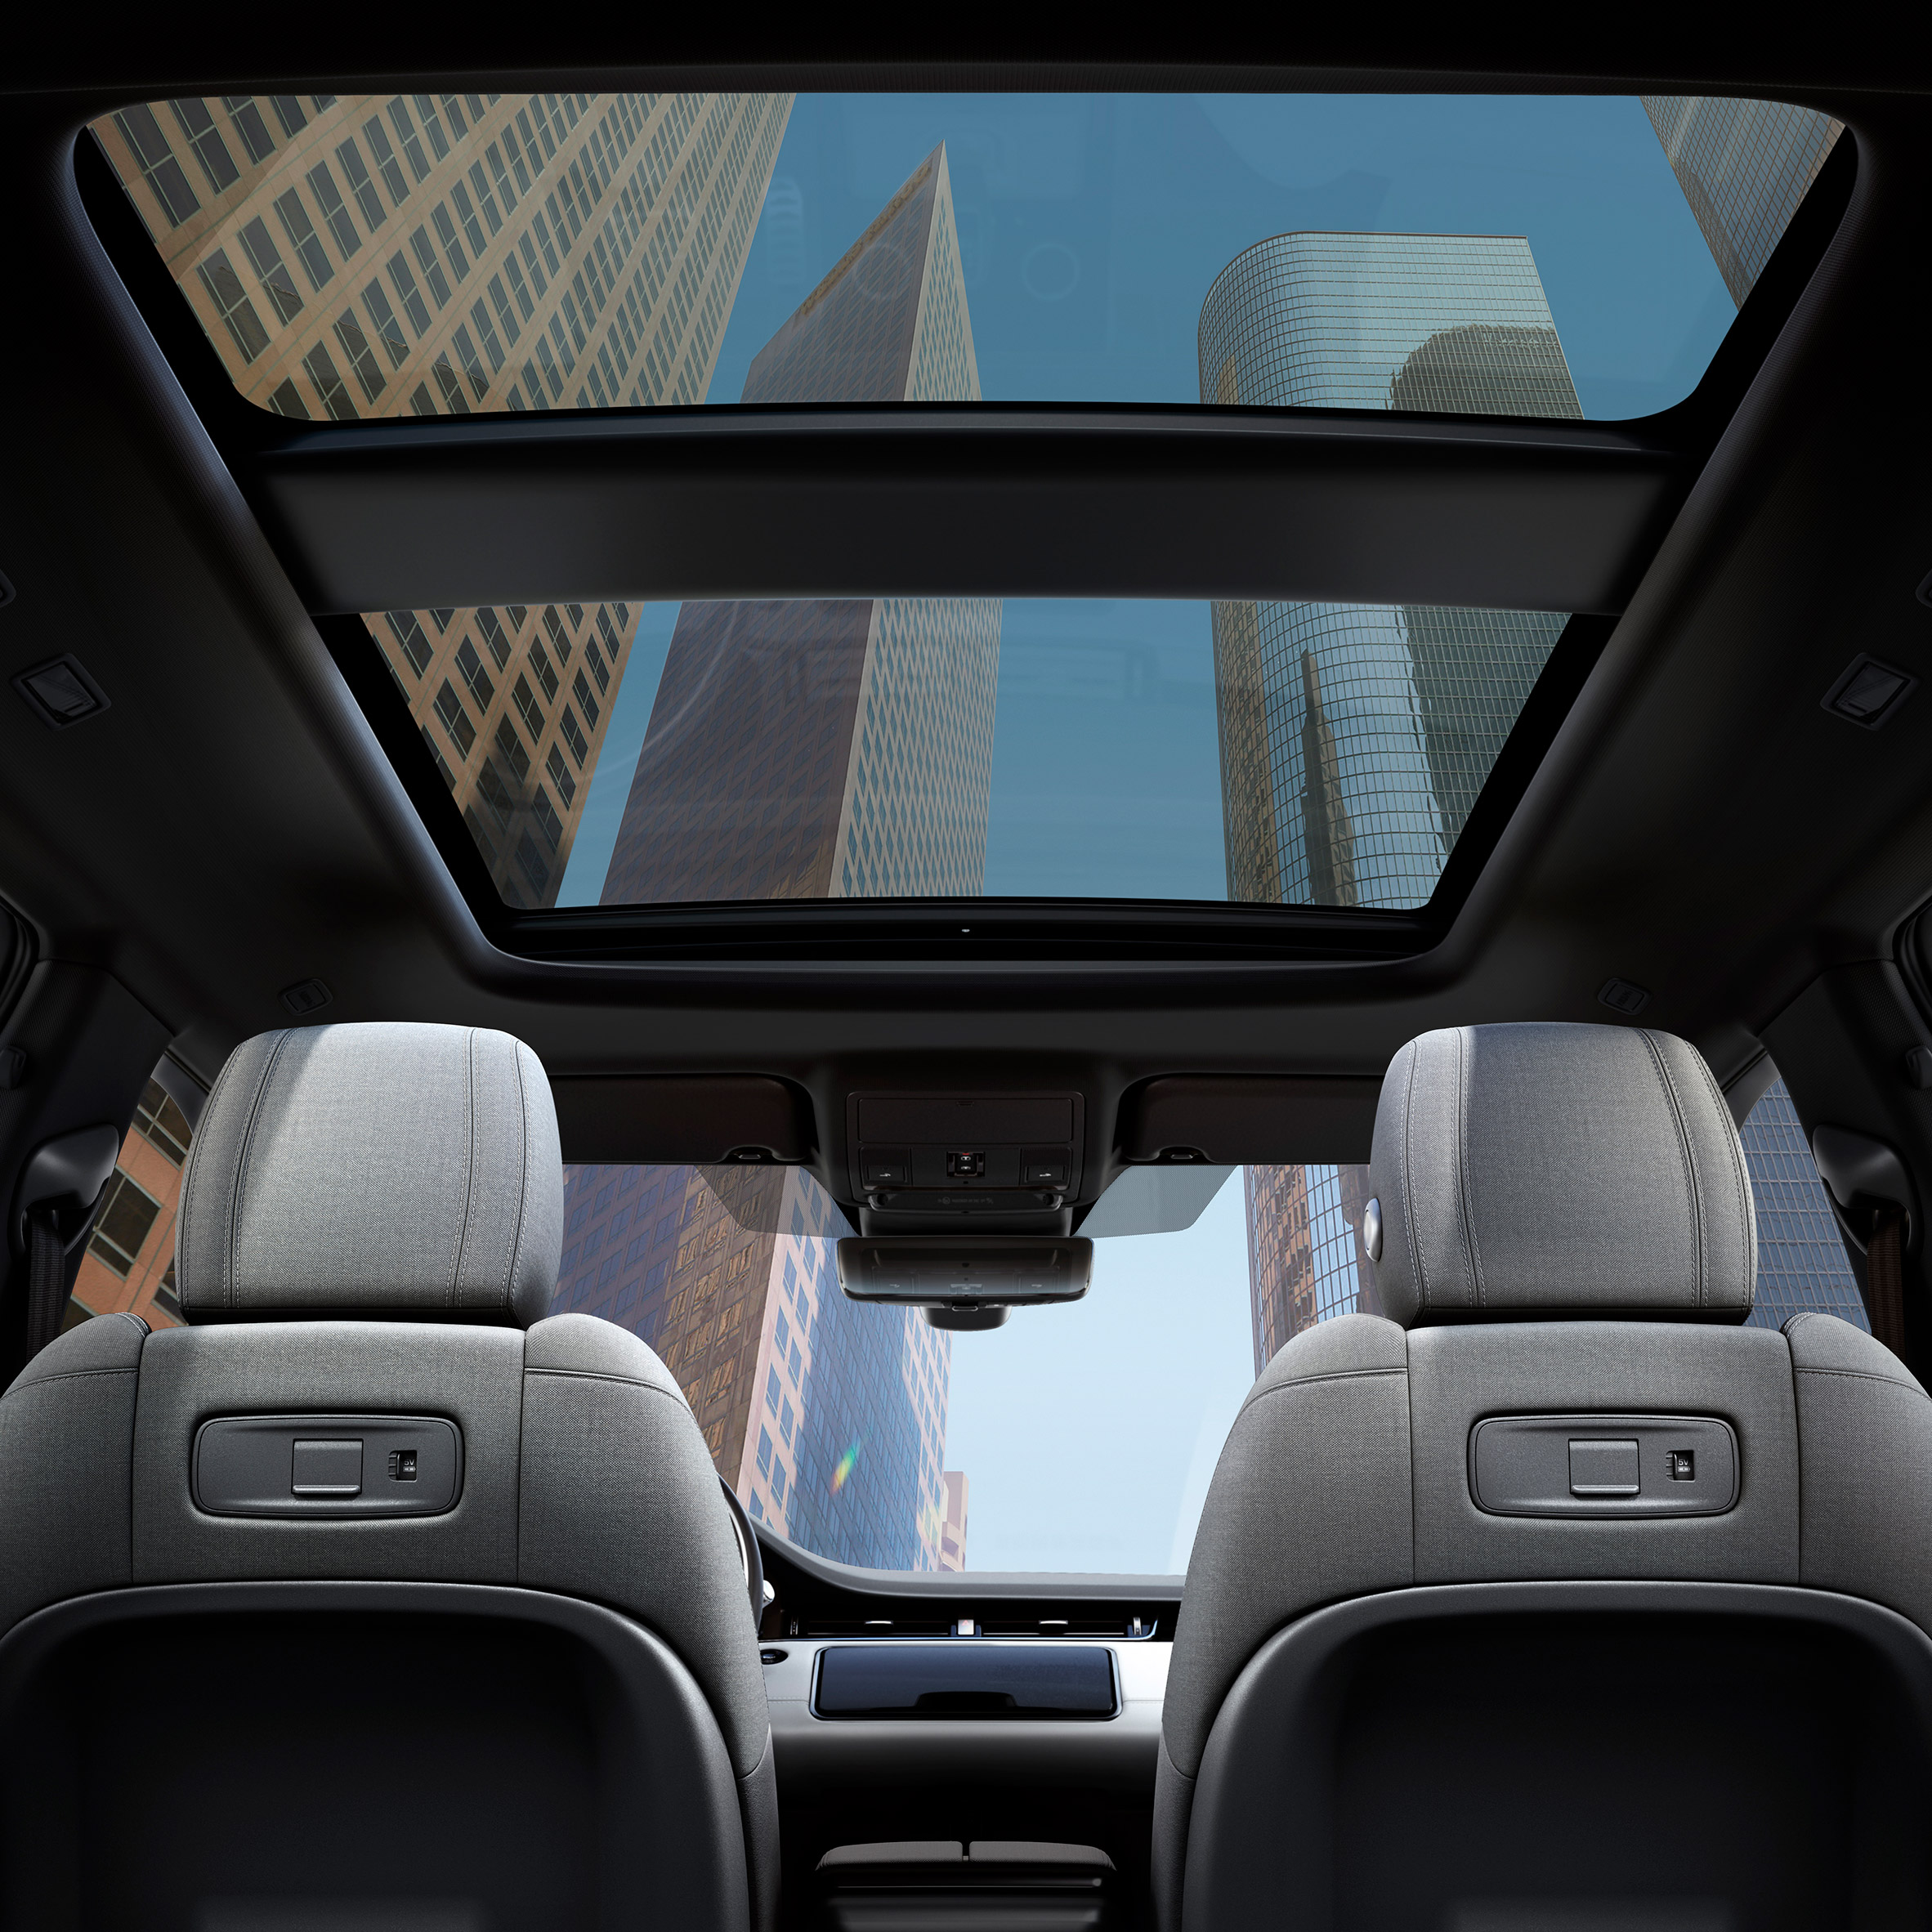 Range Rover Evoque Offers Upholstery In